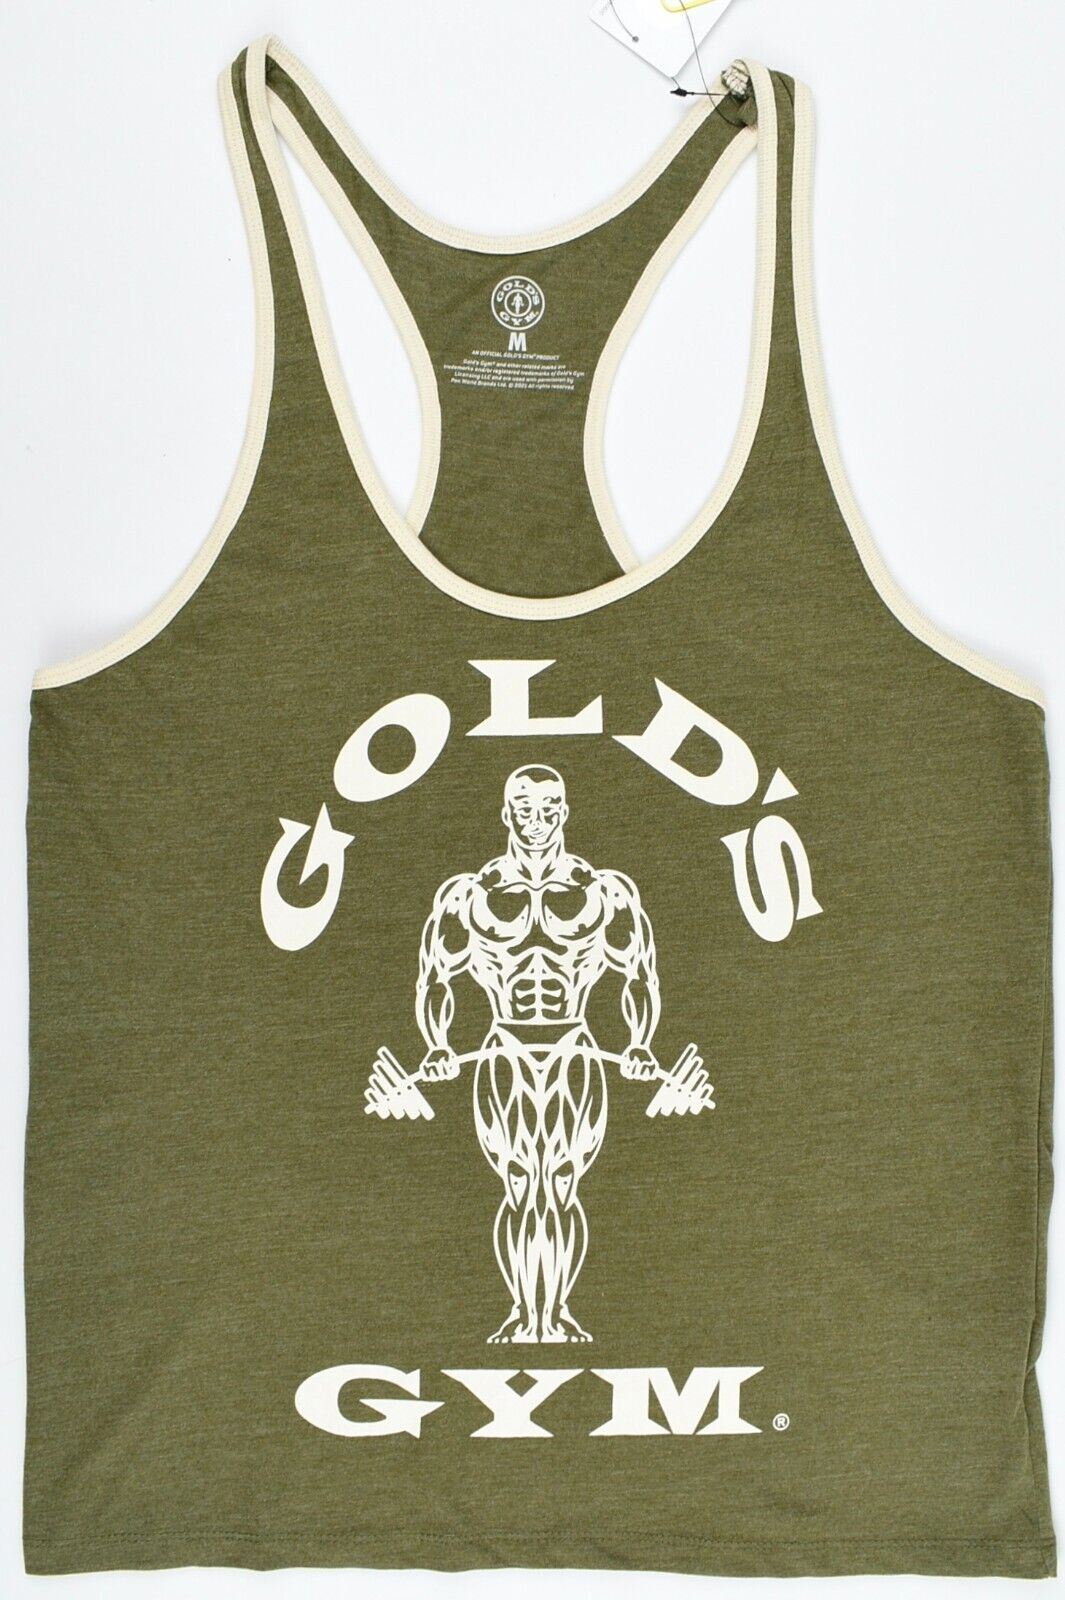 GOLD'S GYM Core Collection Men's MUSCLE JOE Vest Top, Army Green, size M